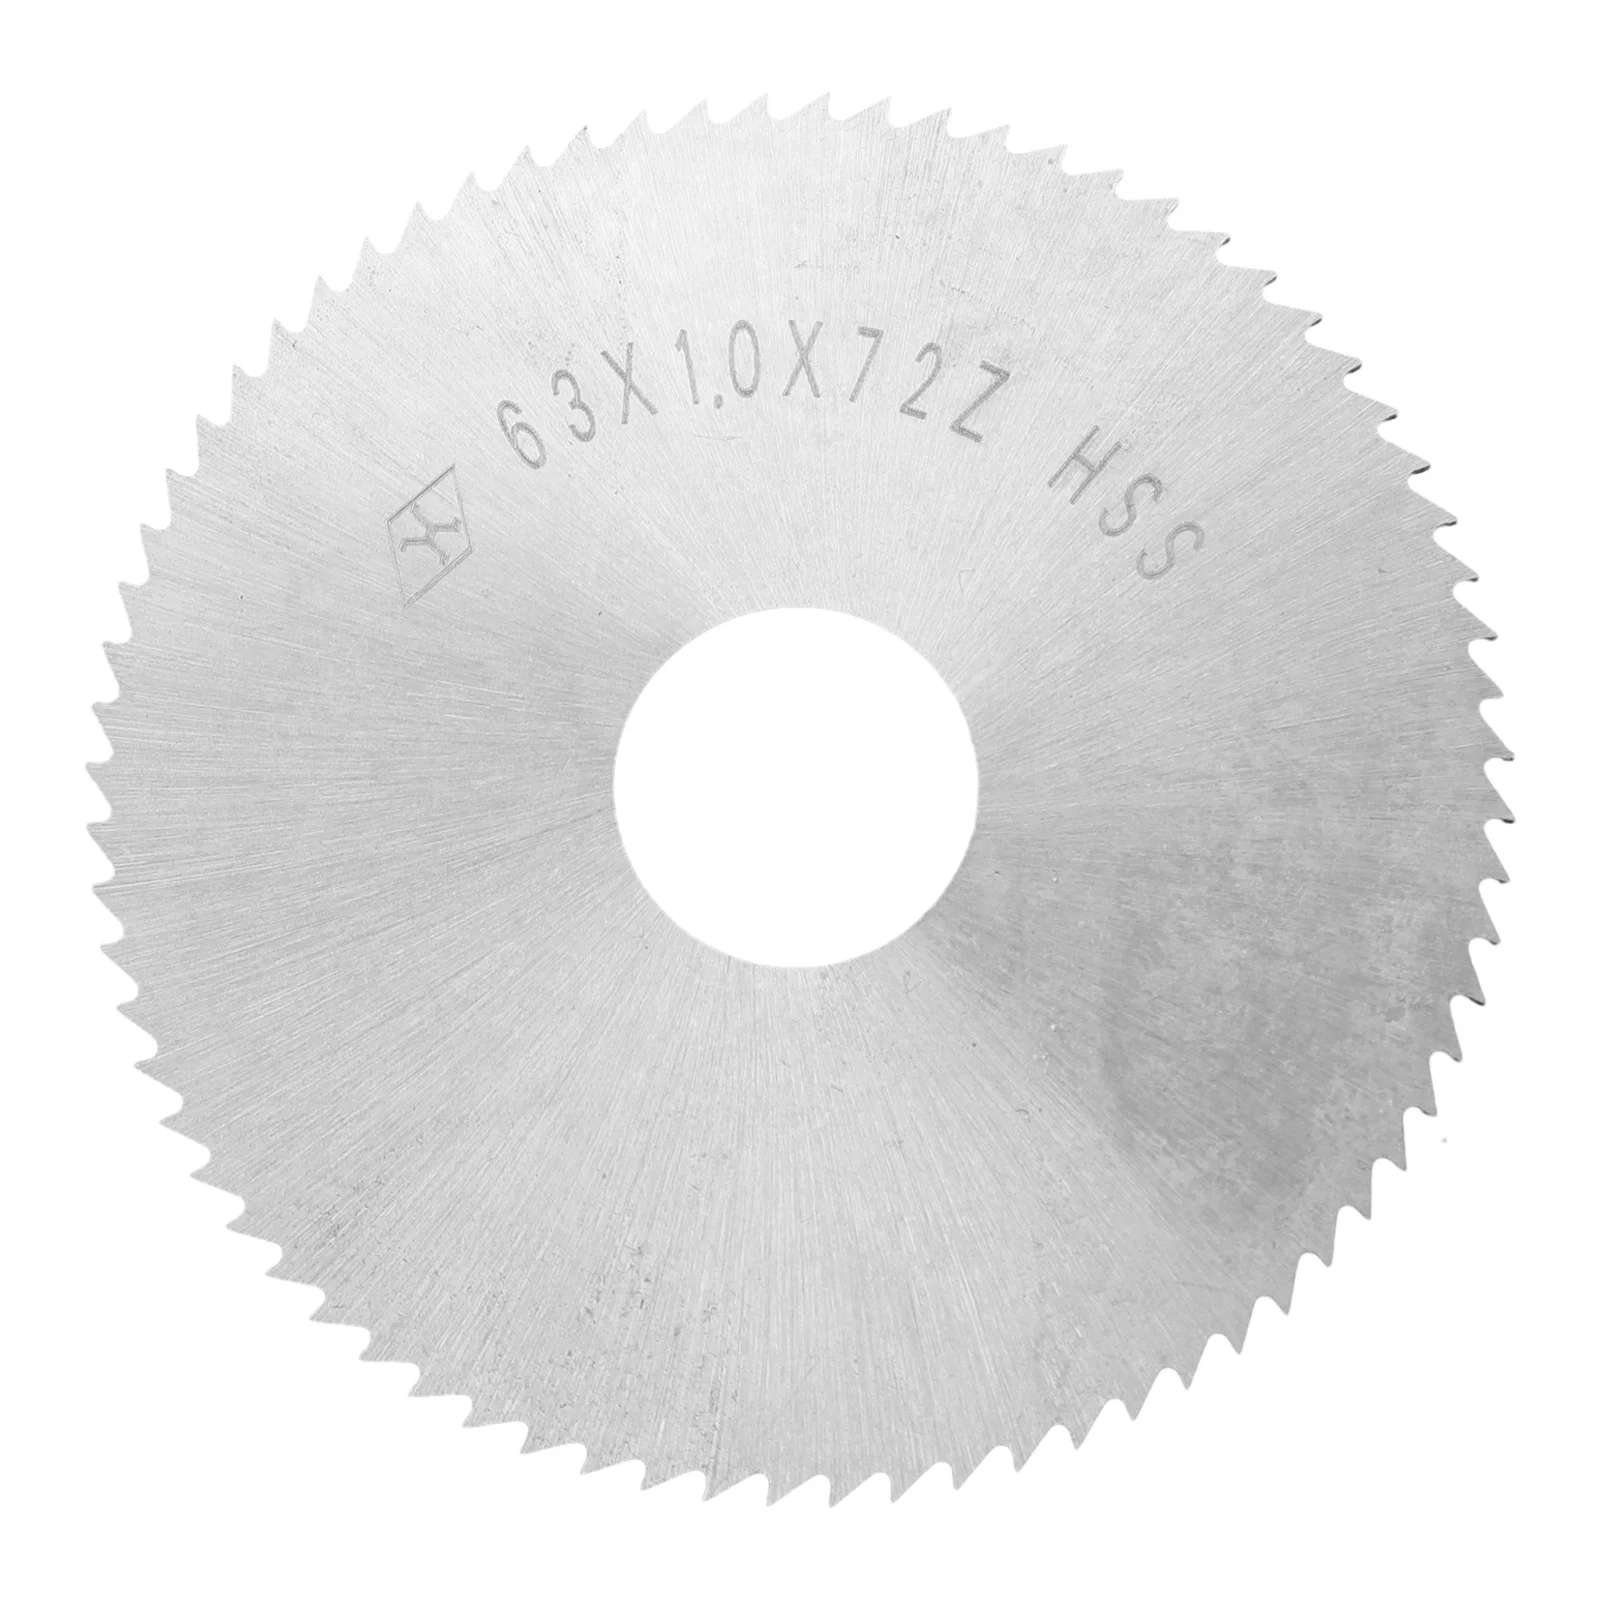 Fast Cutting Mm Bore Diameter Saw Blade Mm Bore Diameter Plastic Steel Jewelers Metals And Soft Other Light Copper high quality reversible row drill bit fast and smooth cutting suitable for multiple board materials 1 piece 3 15mm diameter